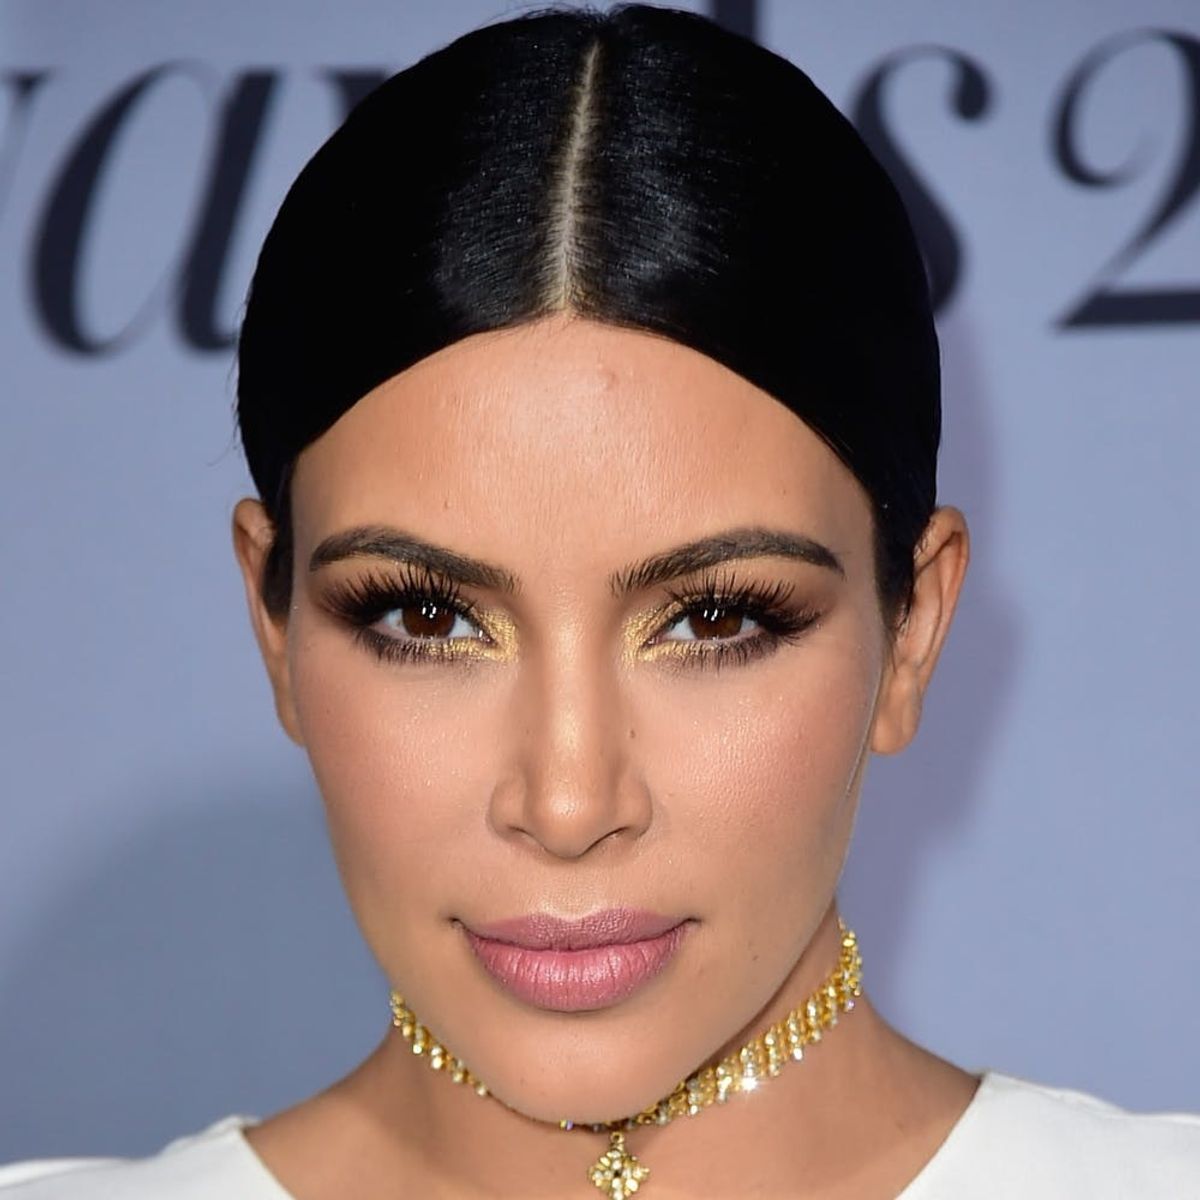 Kim Kardashian West Is as Hooked on Making A Murderer as You Are